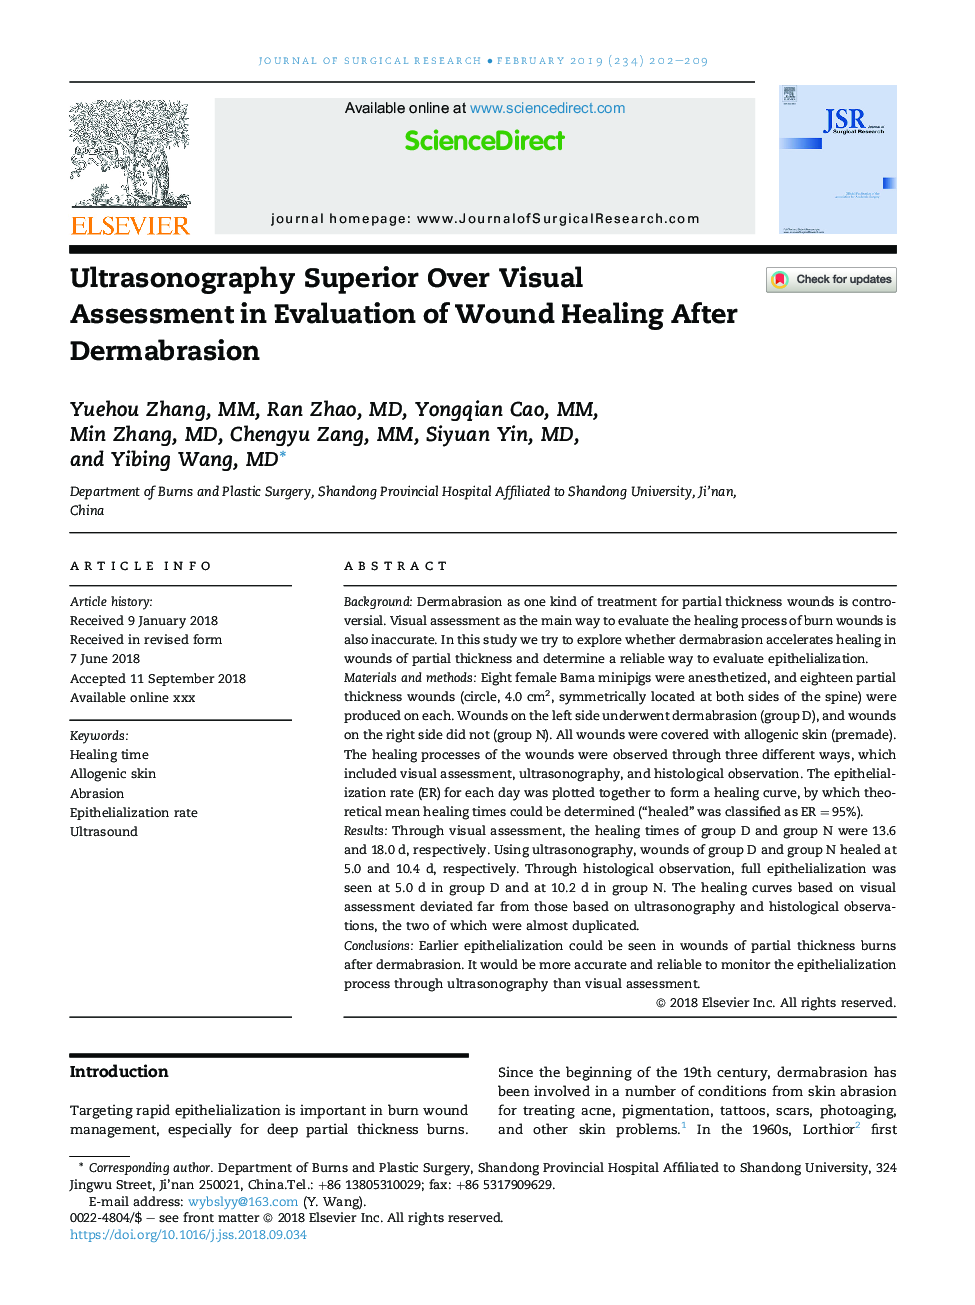 Ultrasonography Superior Over Visual Assessment in Evaluation of Wound Healing After Dermabrasion